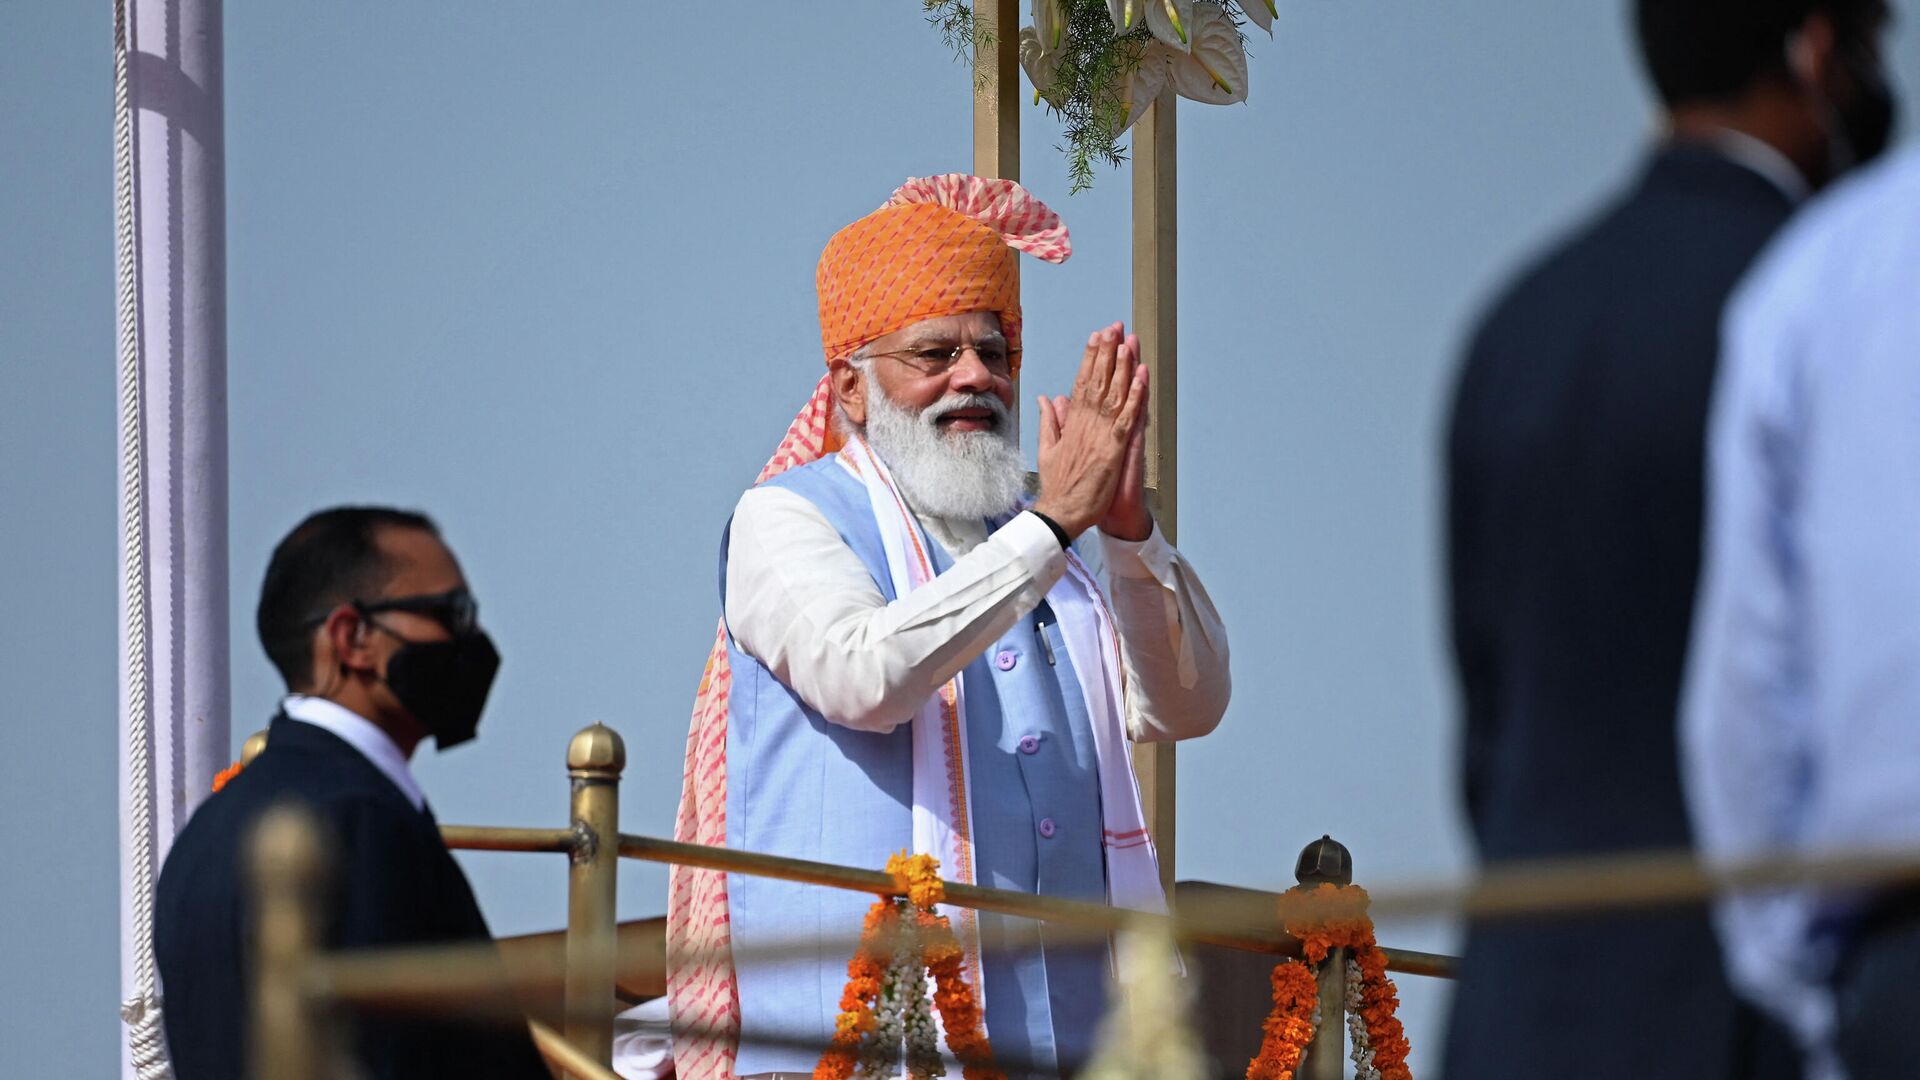 India's Prime Minister Narendra Modi gestures after addressing the nation from the ramparts of the Red Fort during the celebrations to mark country’s 75th Independence Day in New Delhi on August 15, 2021. - Sputnik International, 1920, 15.09.2021